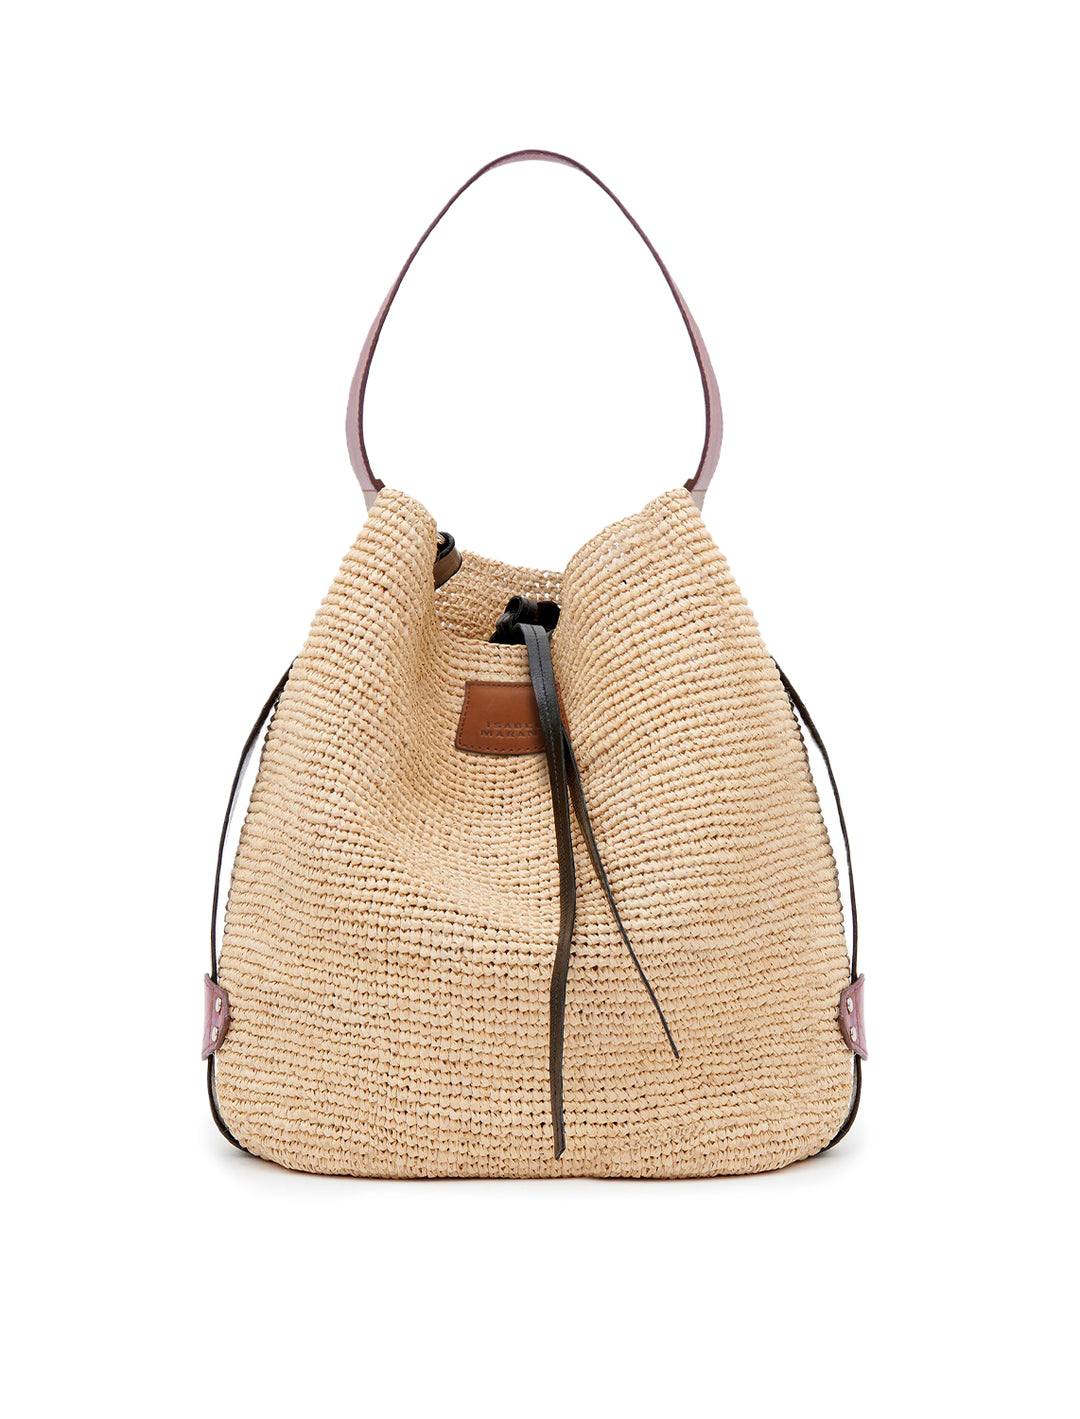 Front view of Isabel Marant Etoile's bayia bag in natural and cognac.